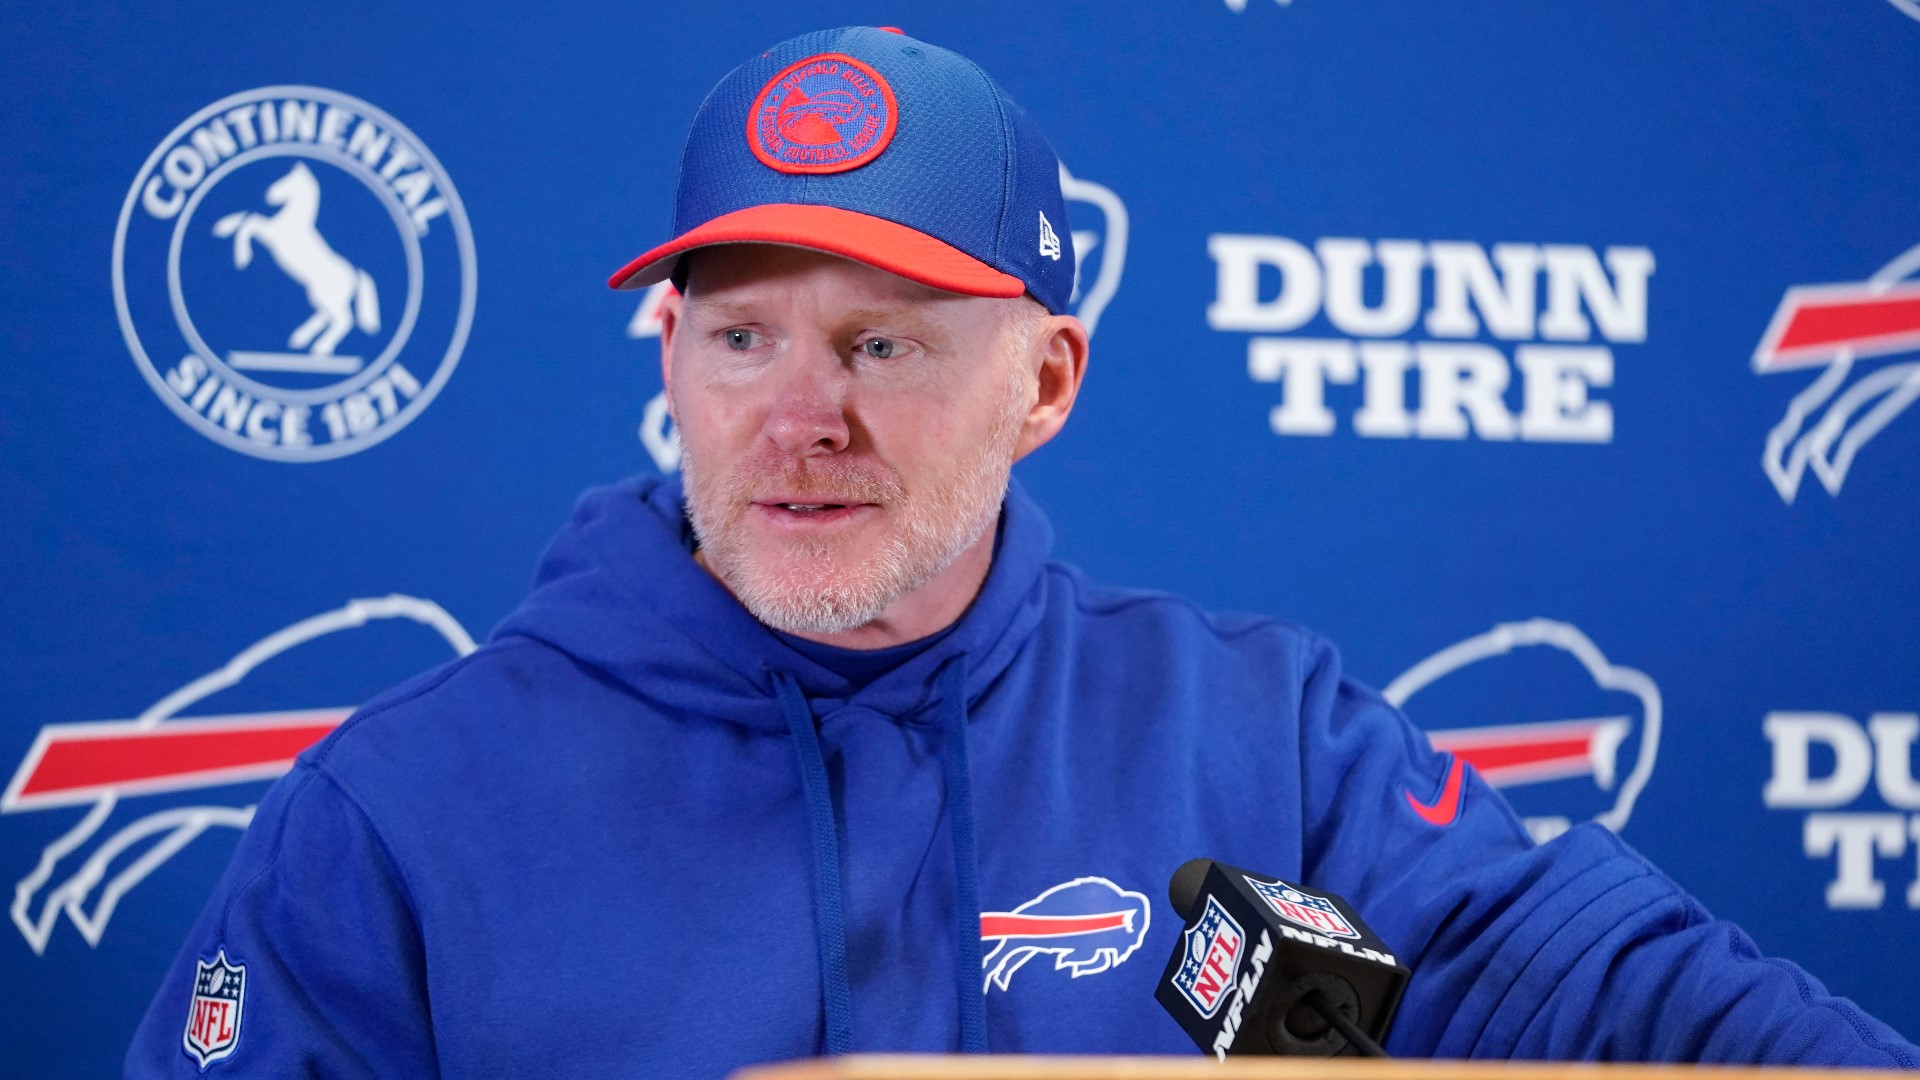 Bills postgame reaction: Sean McDermott discusses the 20-17 Bills victory in Kansas City against the Chiefs.